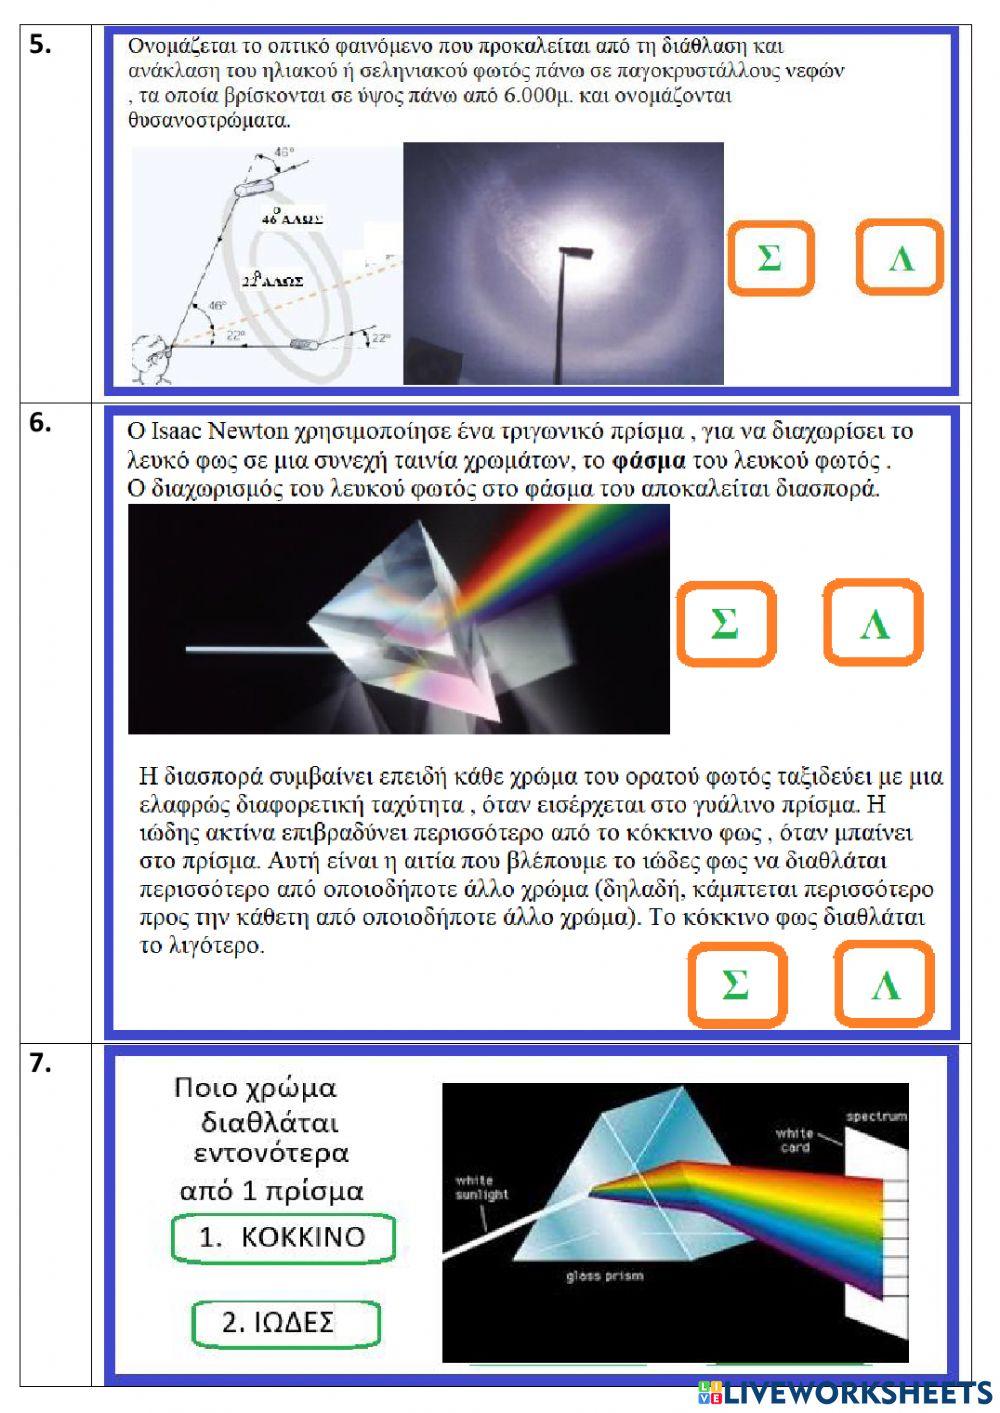 Refraction applications